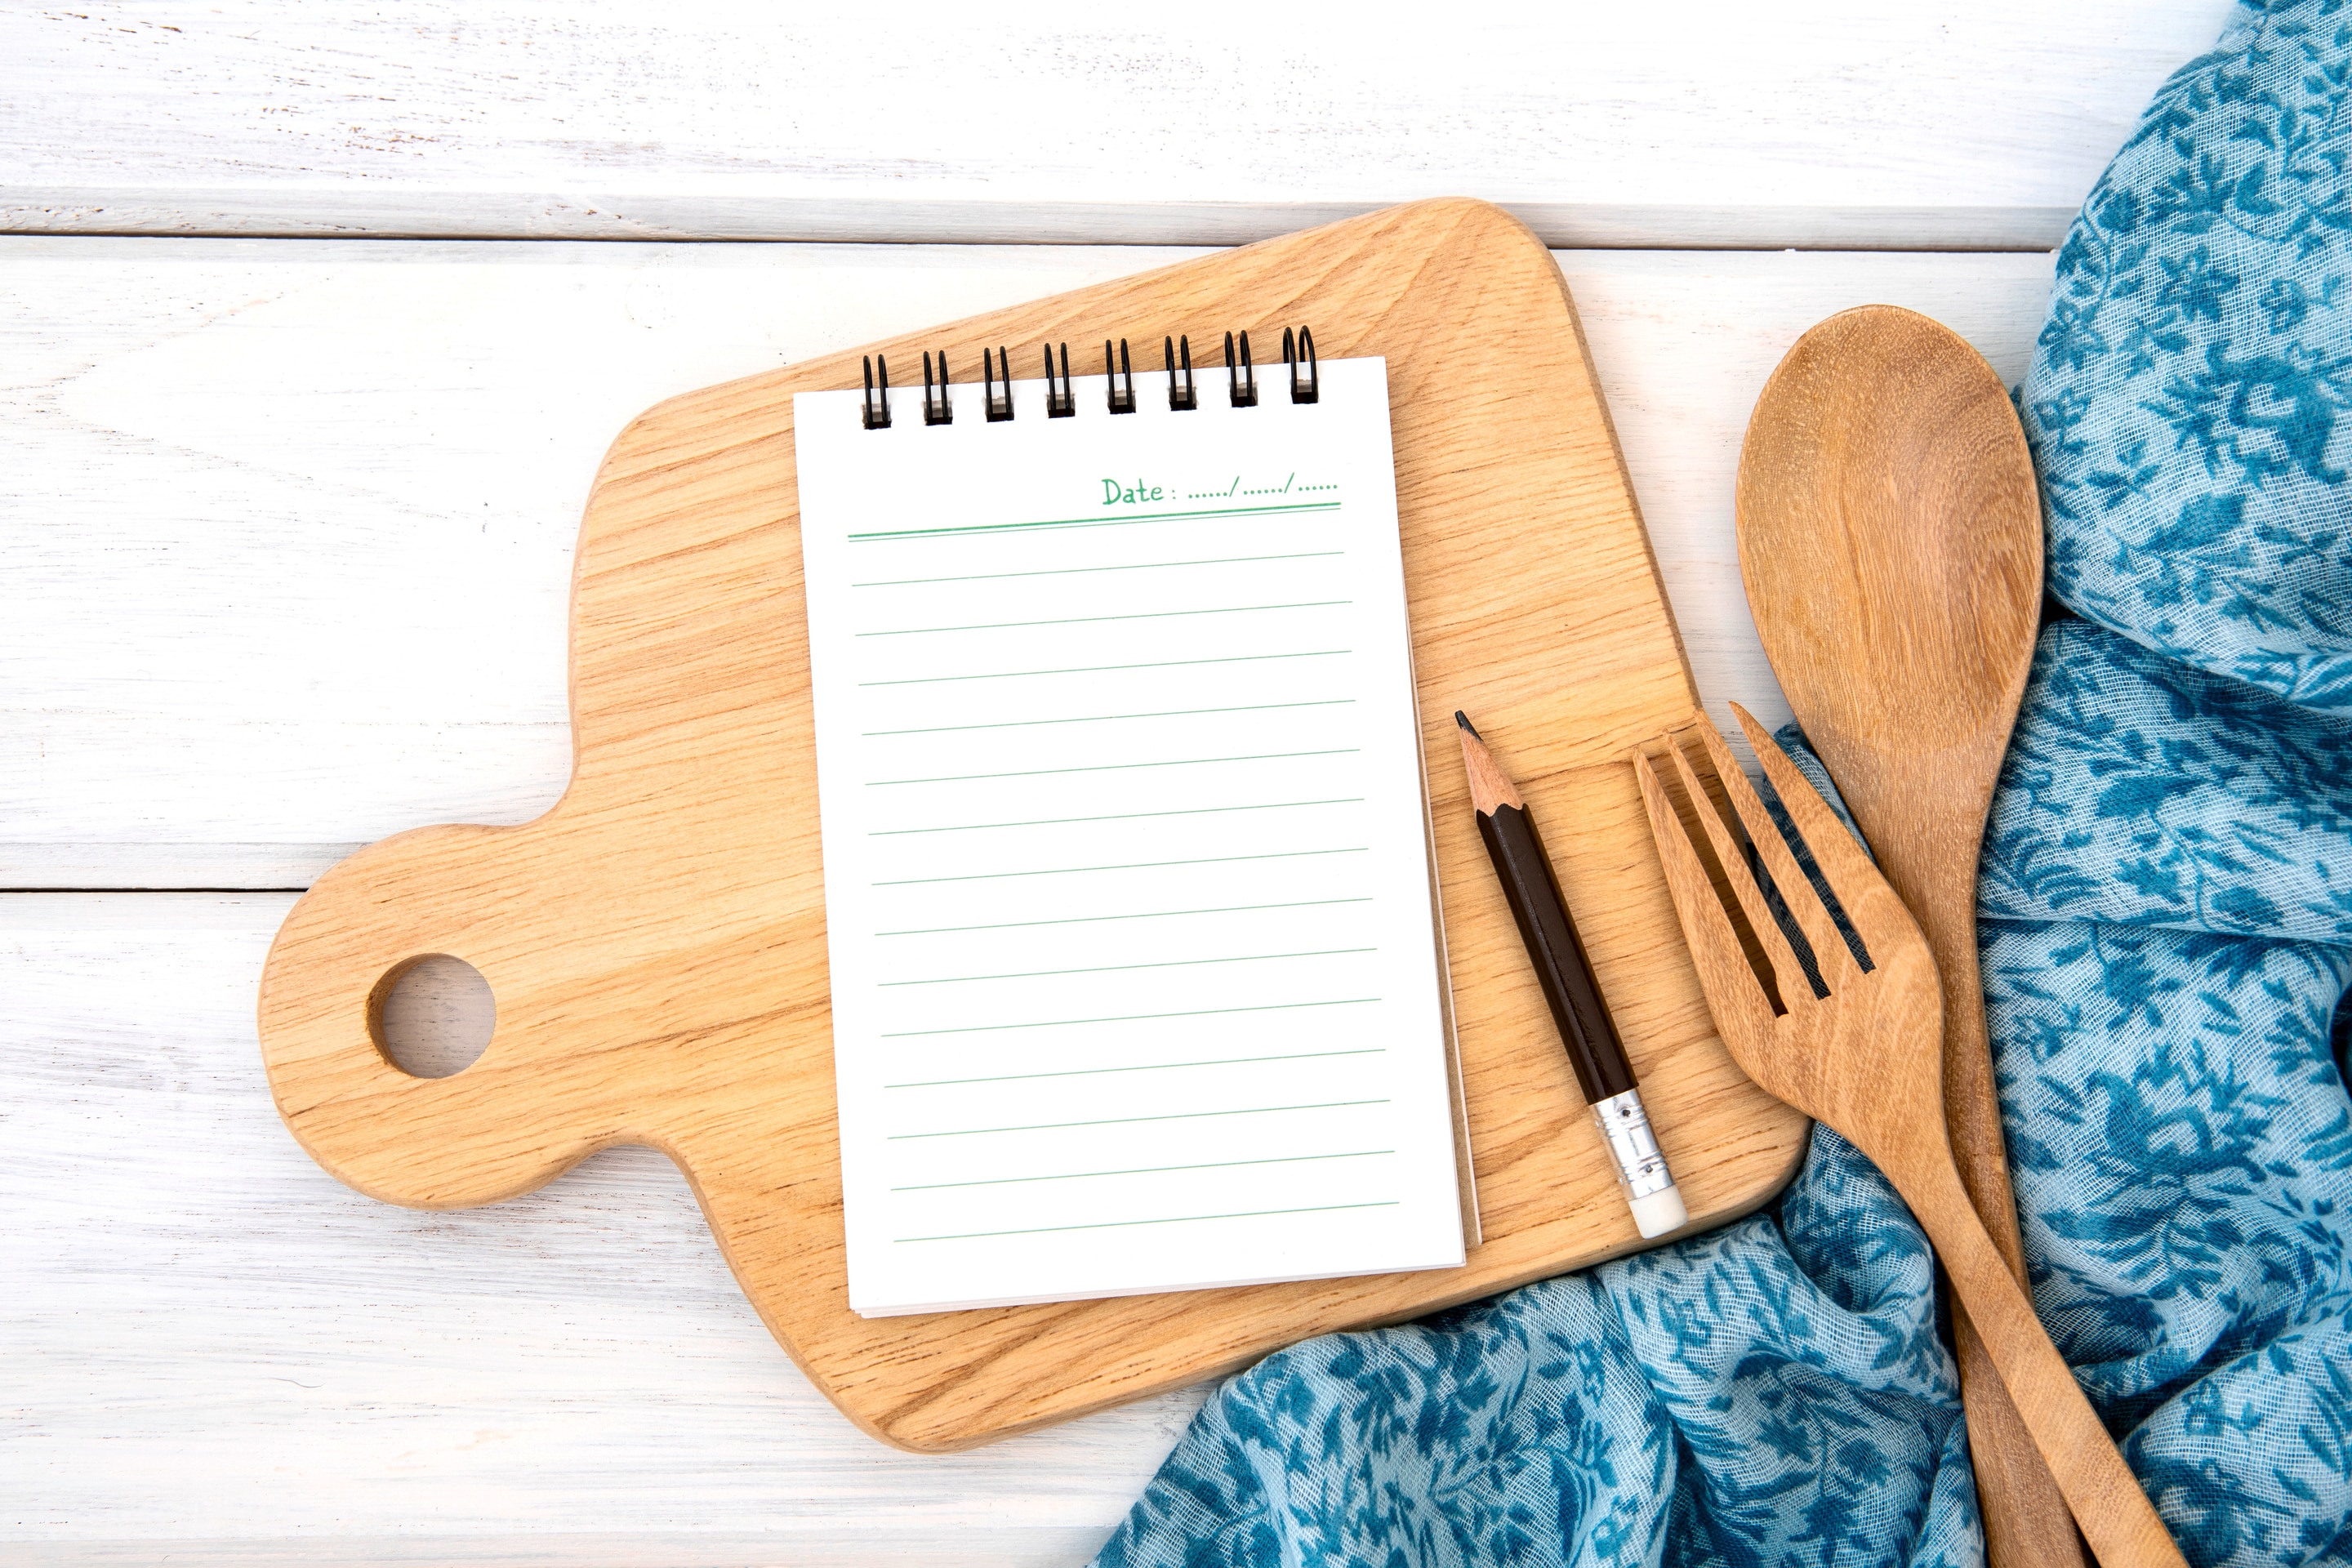 A note pad lies on a wooden chopping board